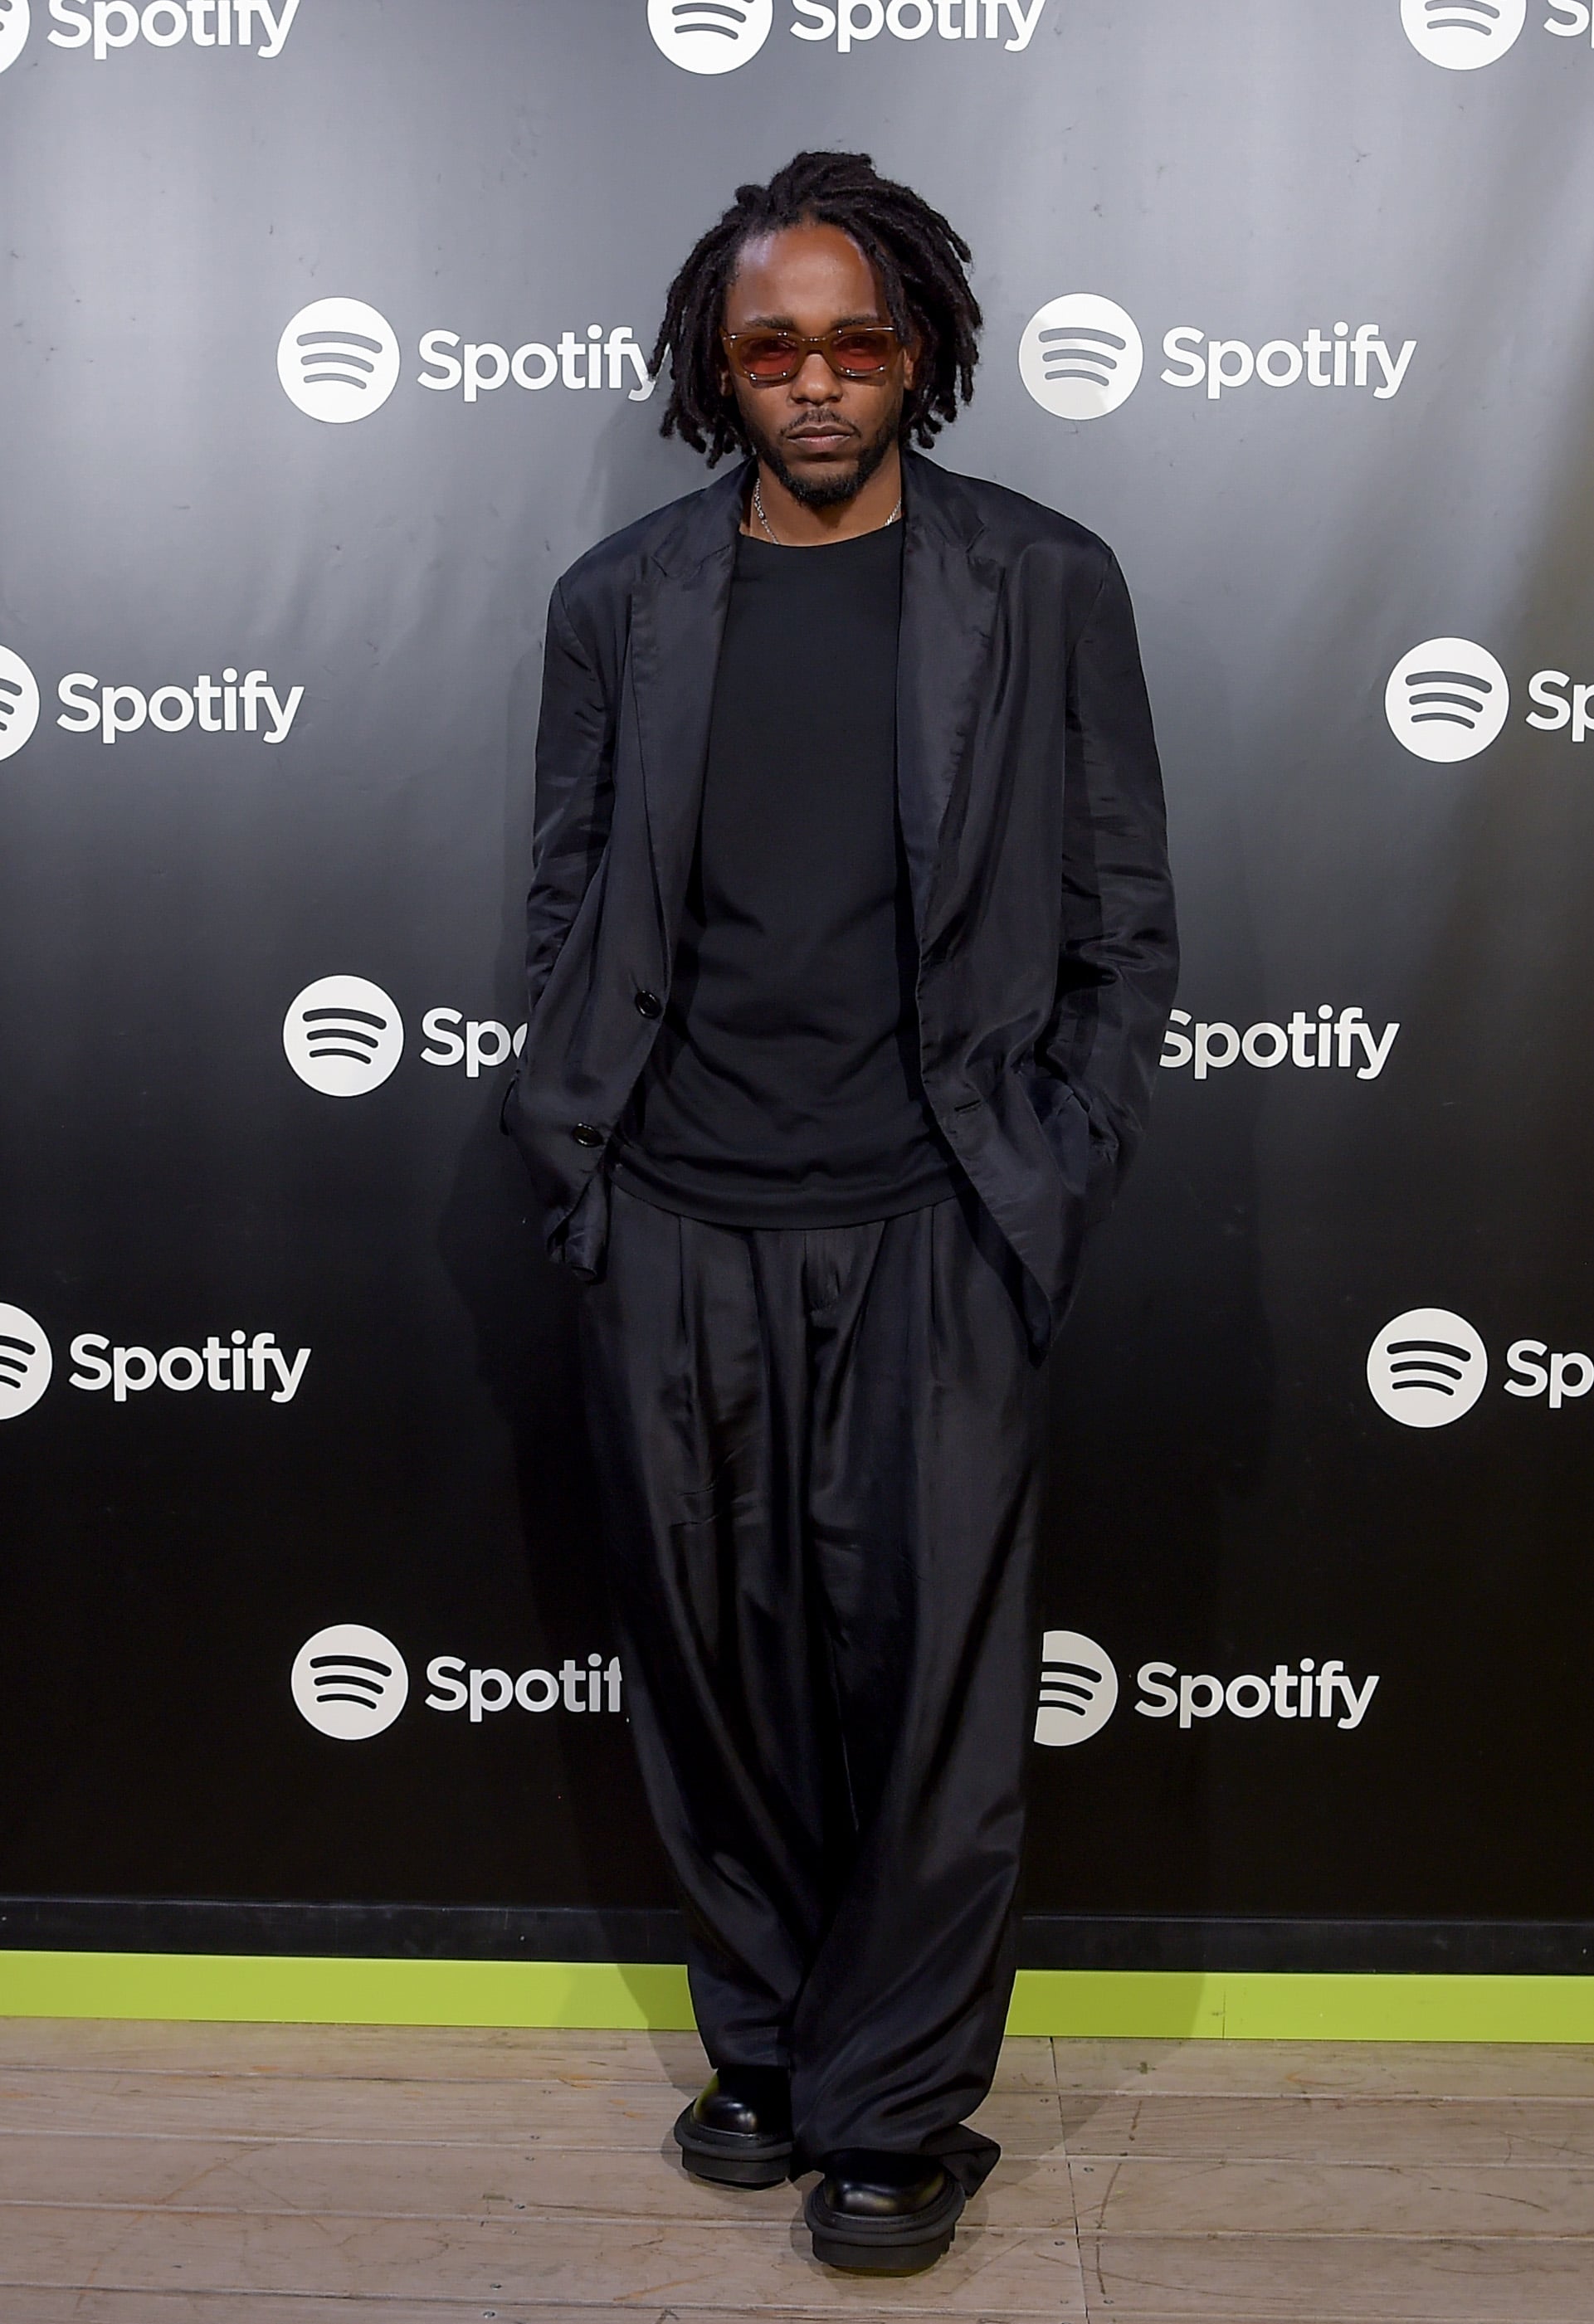 Kendrick Lamar at Spotify evening of music in Cannes